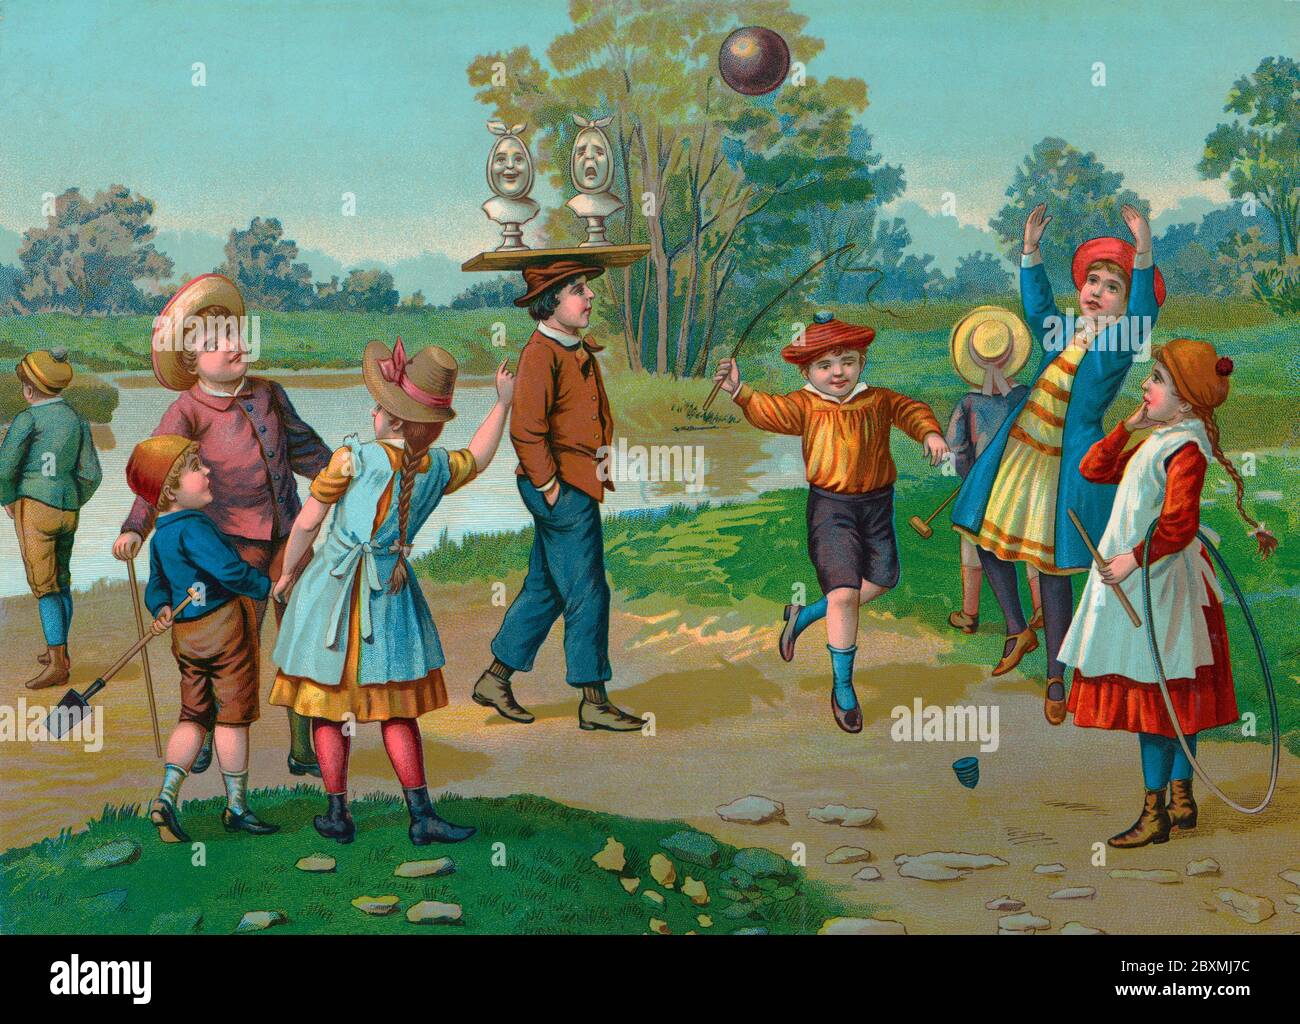 Old illustration. On this British 19th century illustration children are playing outdoors with typical toys of the time. A happy summer scene. Stock Photo